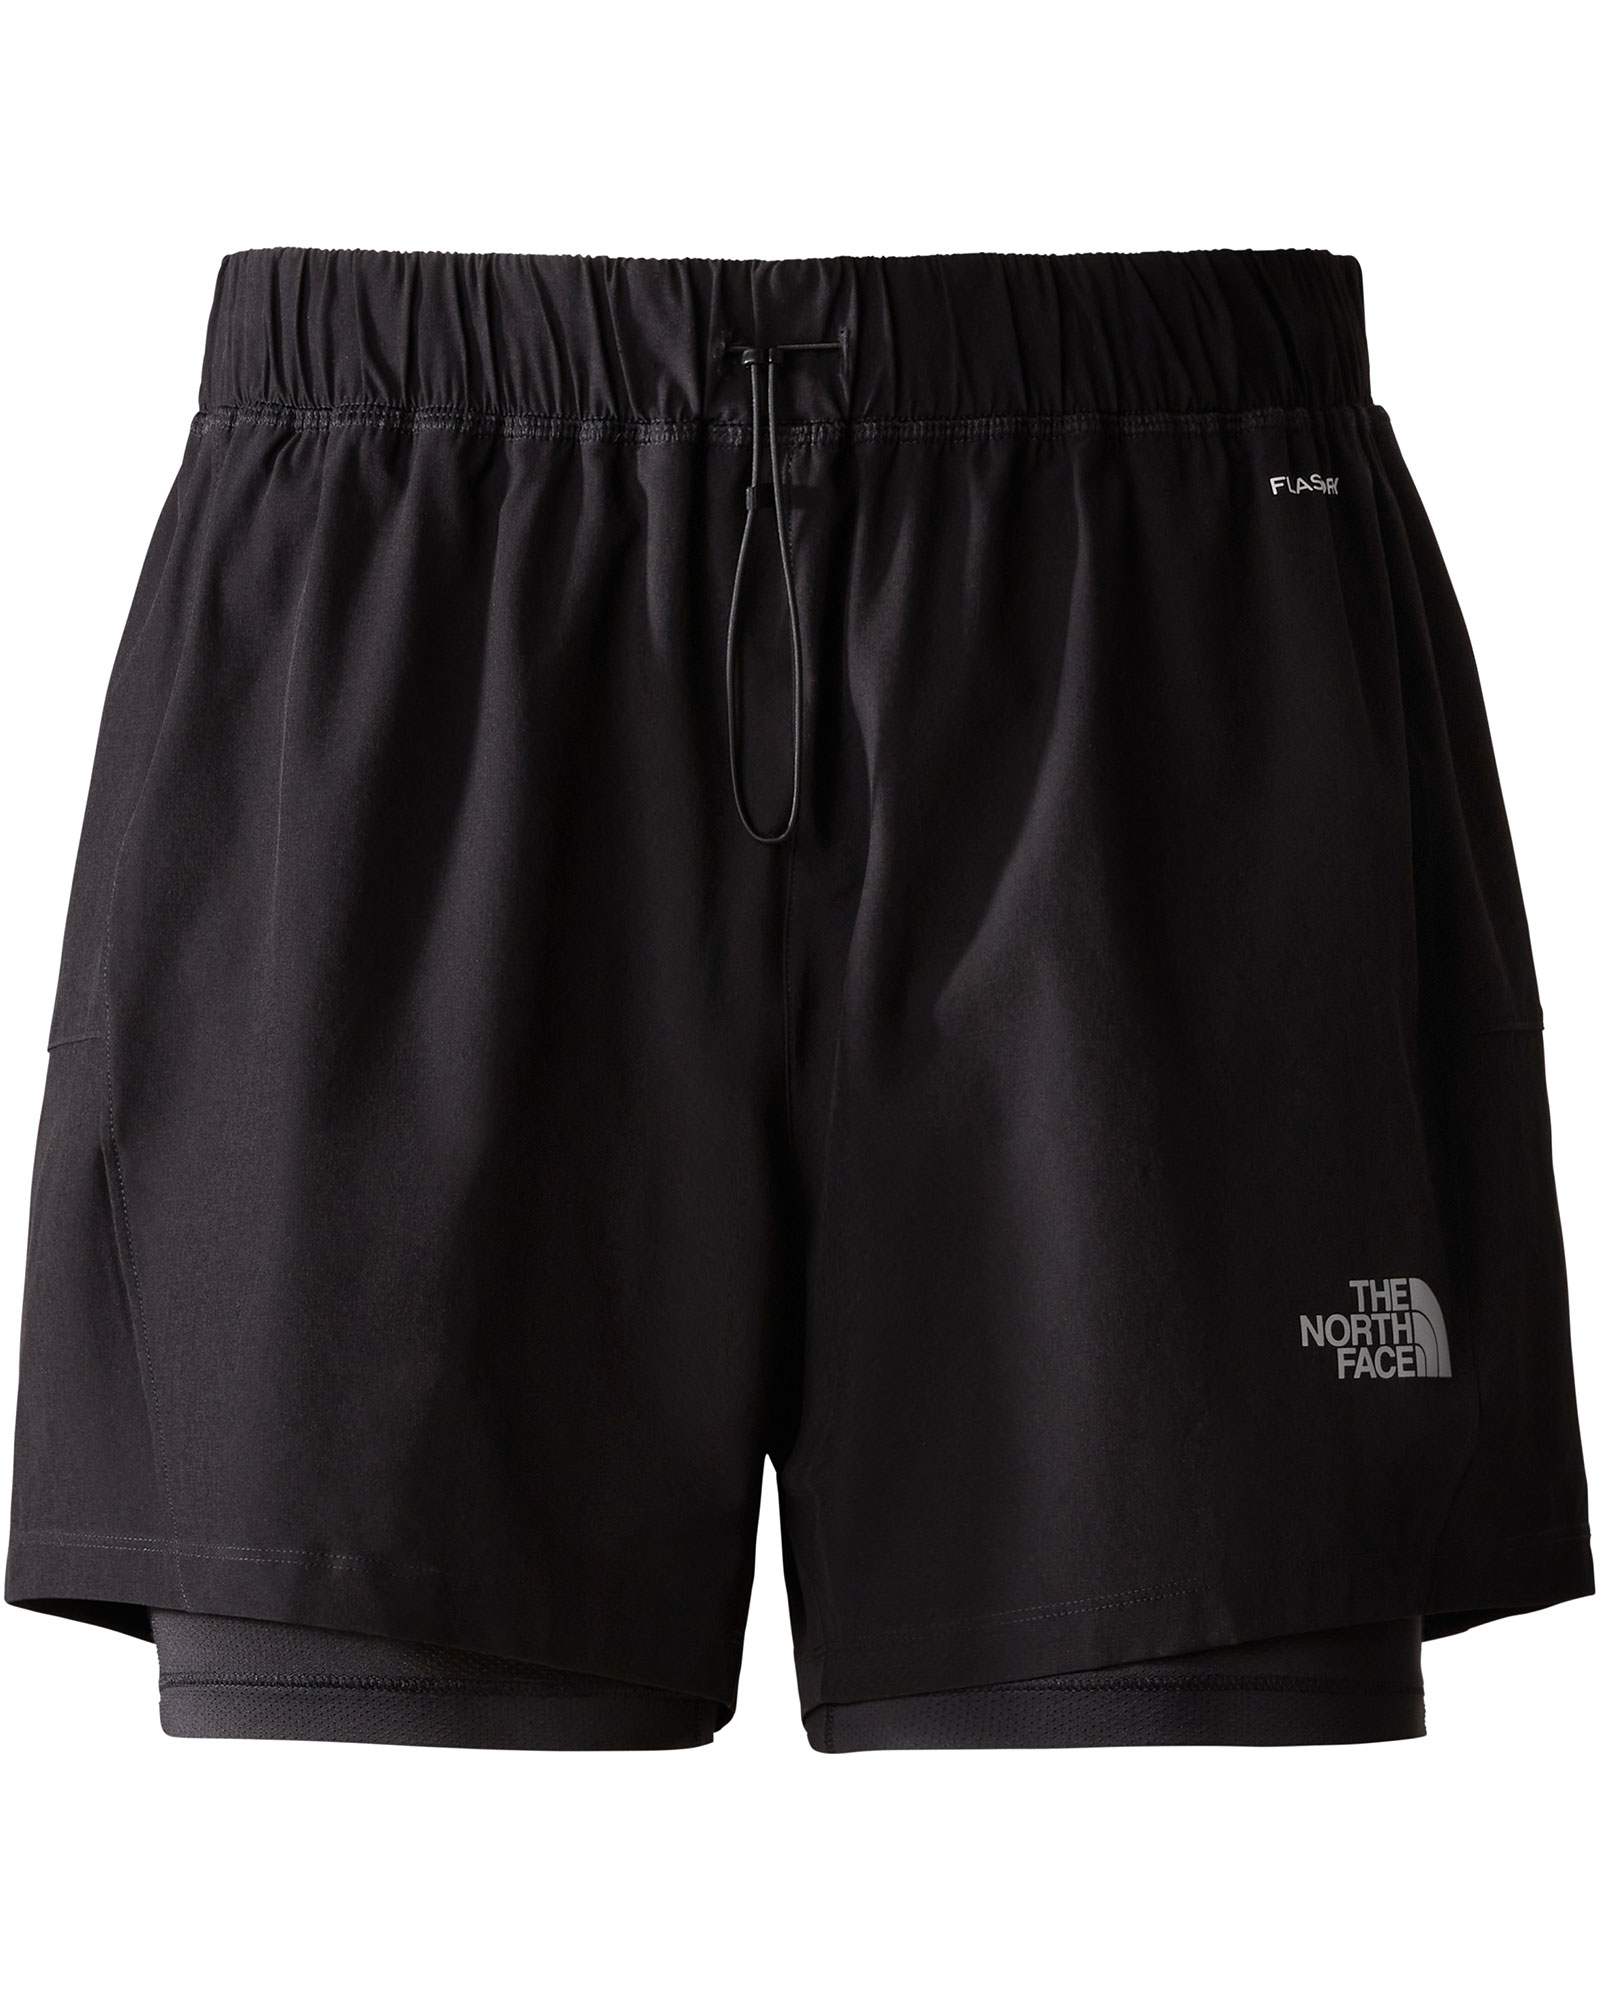 The North Face Women’s 2in1 Shorts - TNF Black S